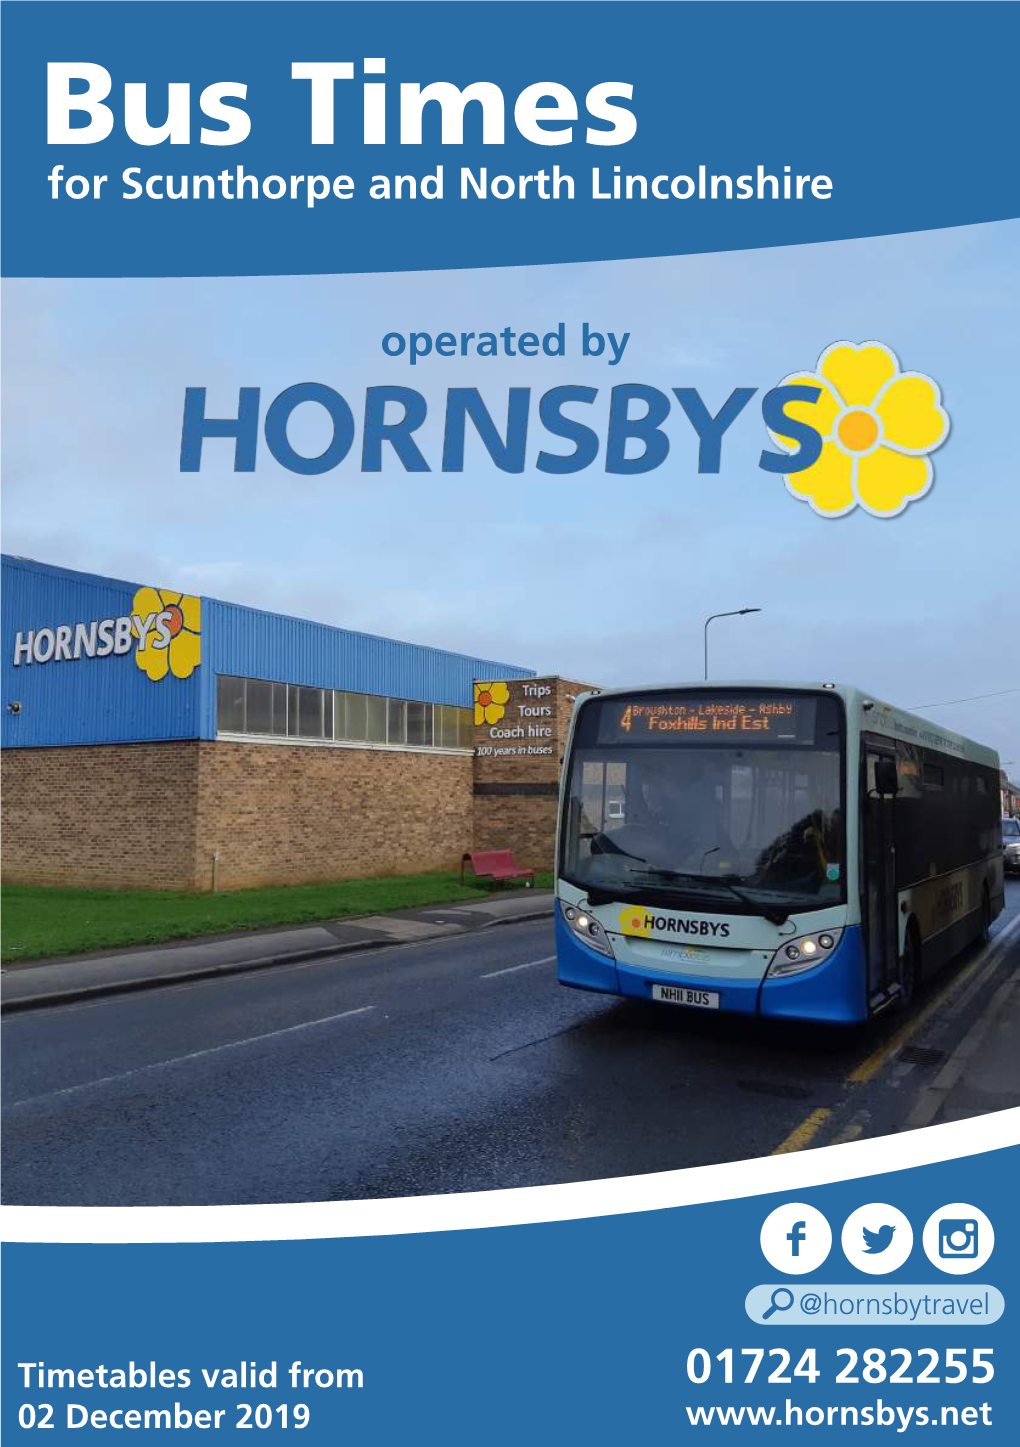 Bus Times for Scunthorpe and North Lincolnshire